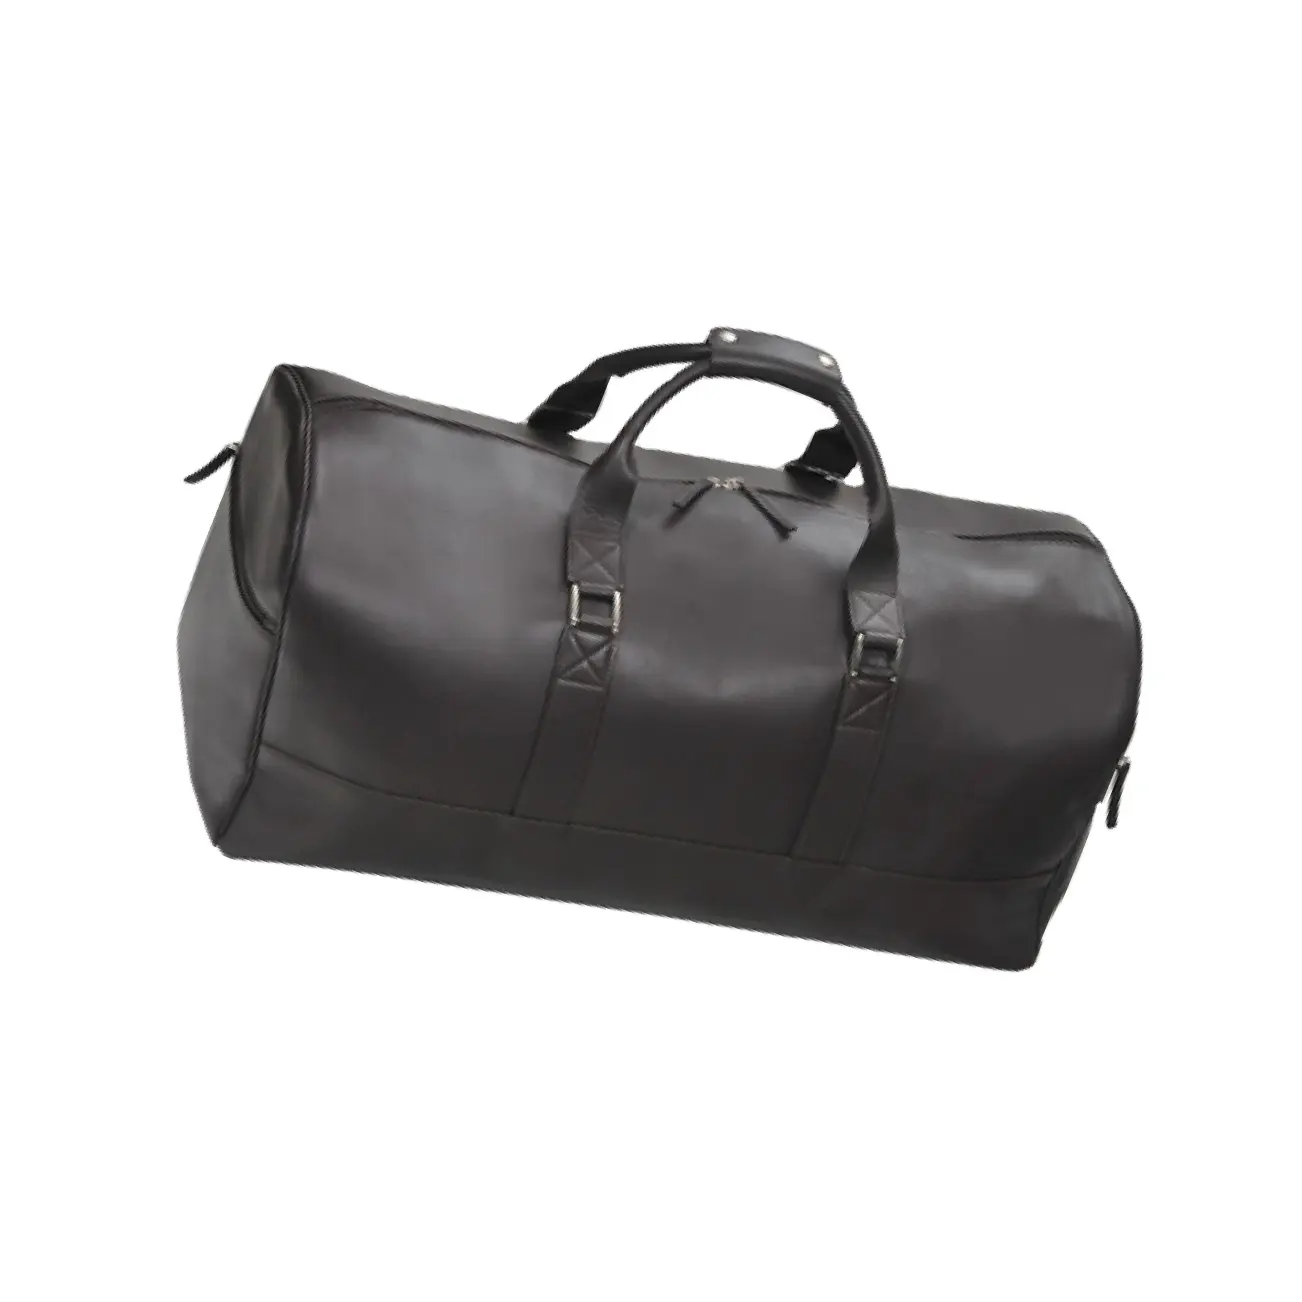 Luggage and travel bags suitcases / mens womens stylish duffel bag / new arrival duffel bags in travel bags